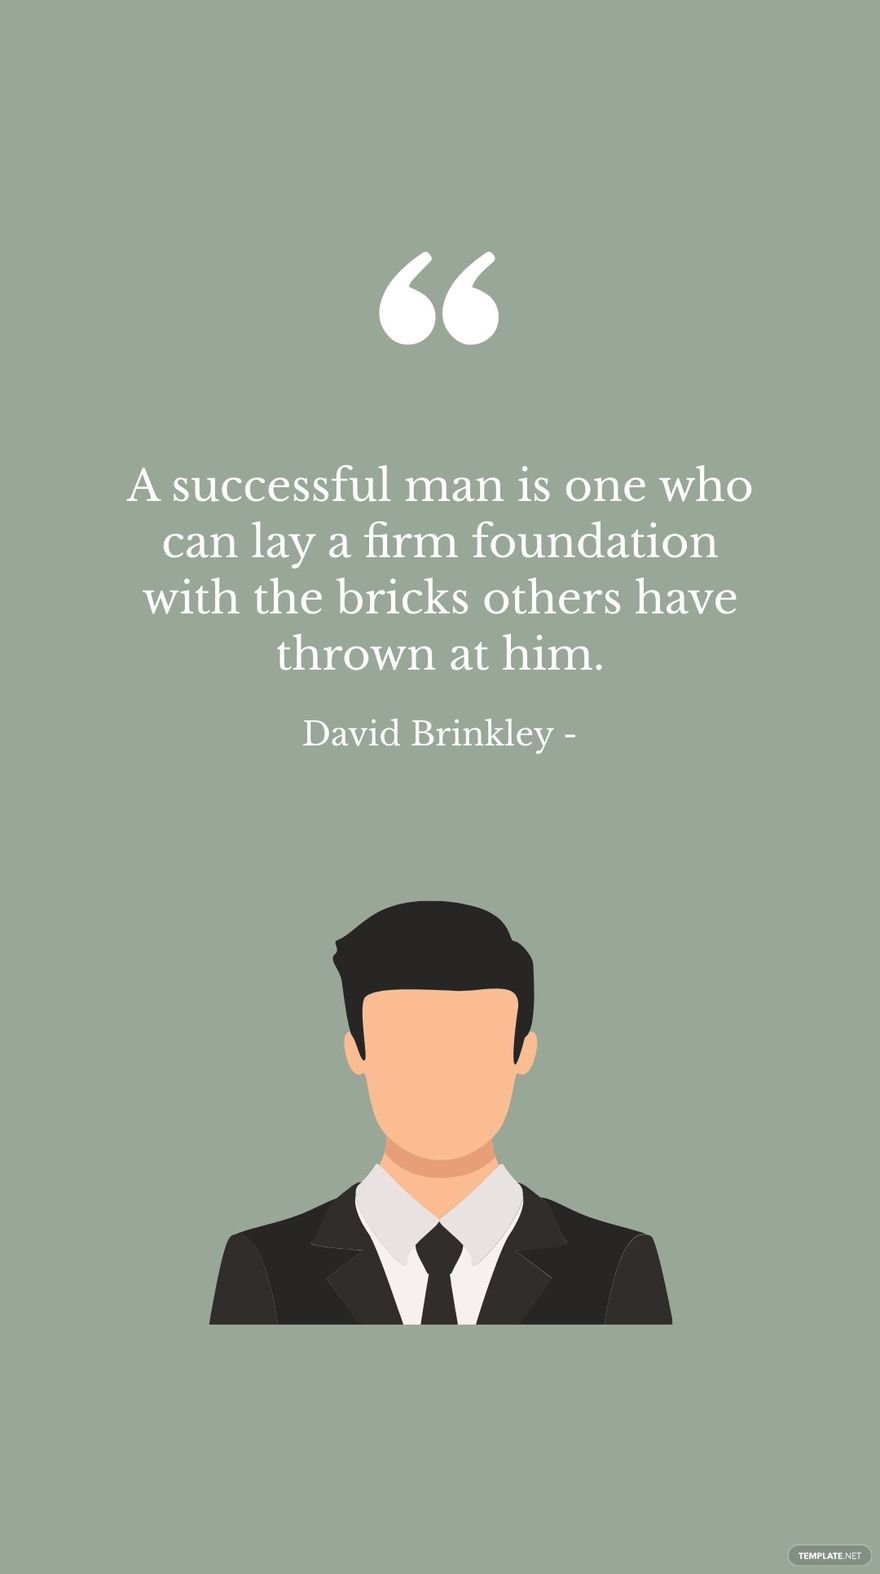 David Brinkley - A successful man is one who can lay a firm foundation with the bricks others have thrown at him.